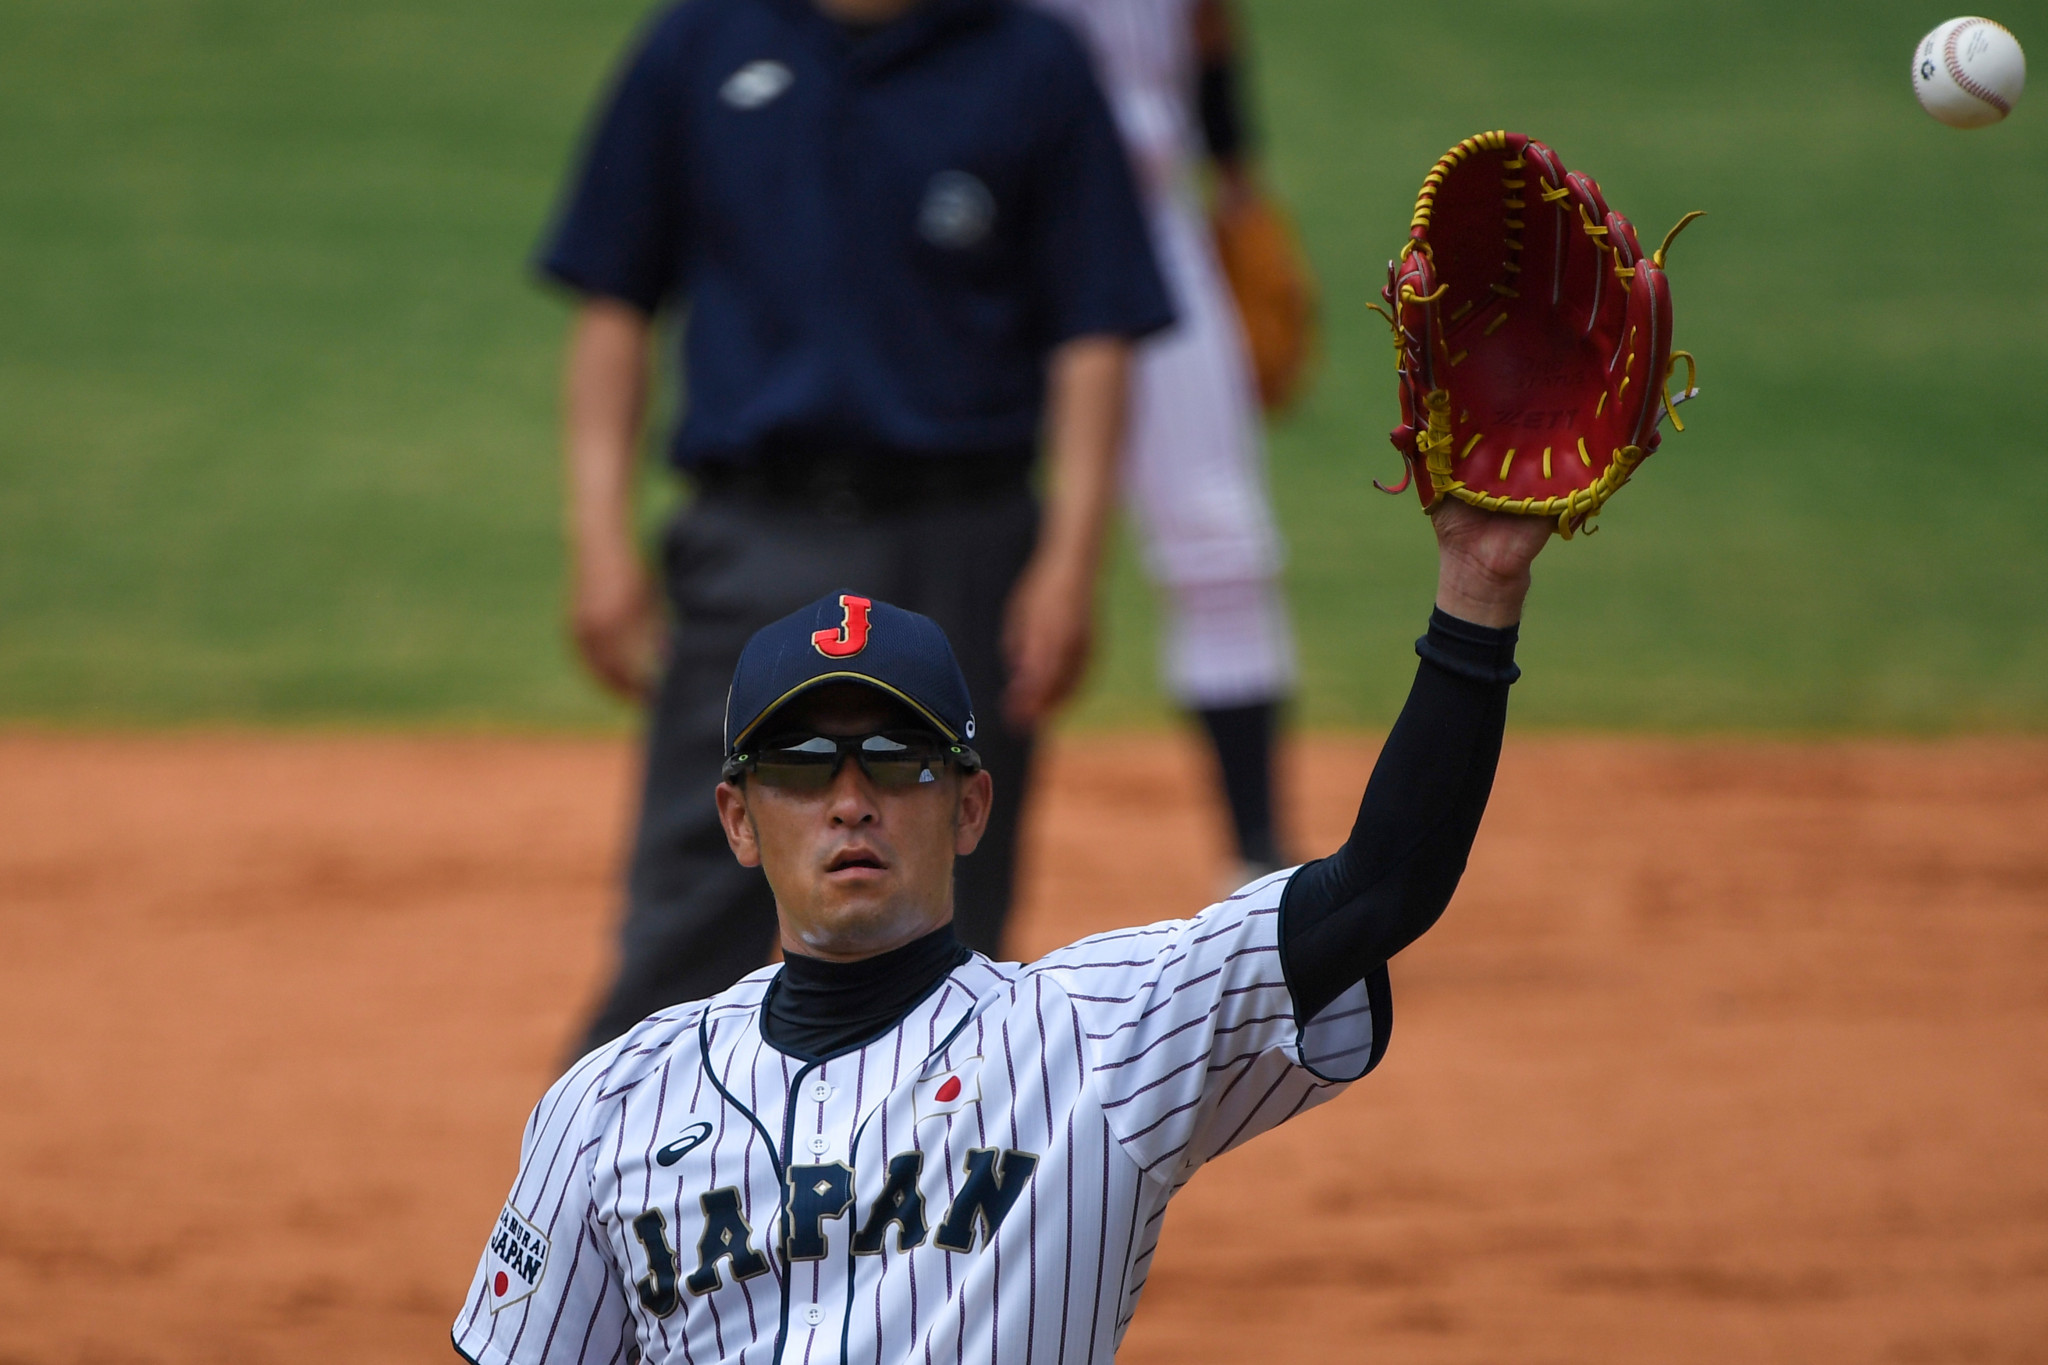 WBSC discusses Baseball5 and 2030 Asian Games in latest continental meeting